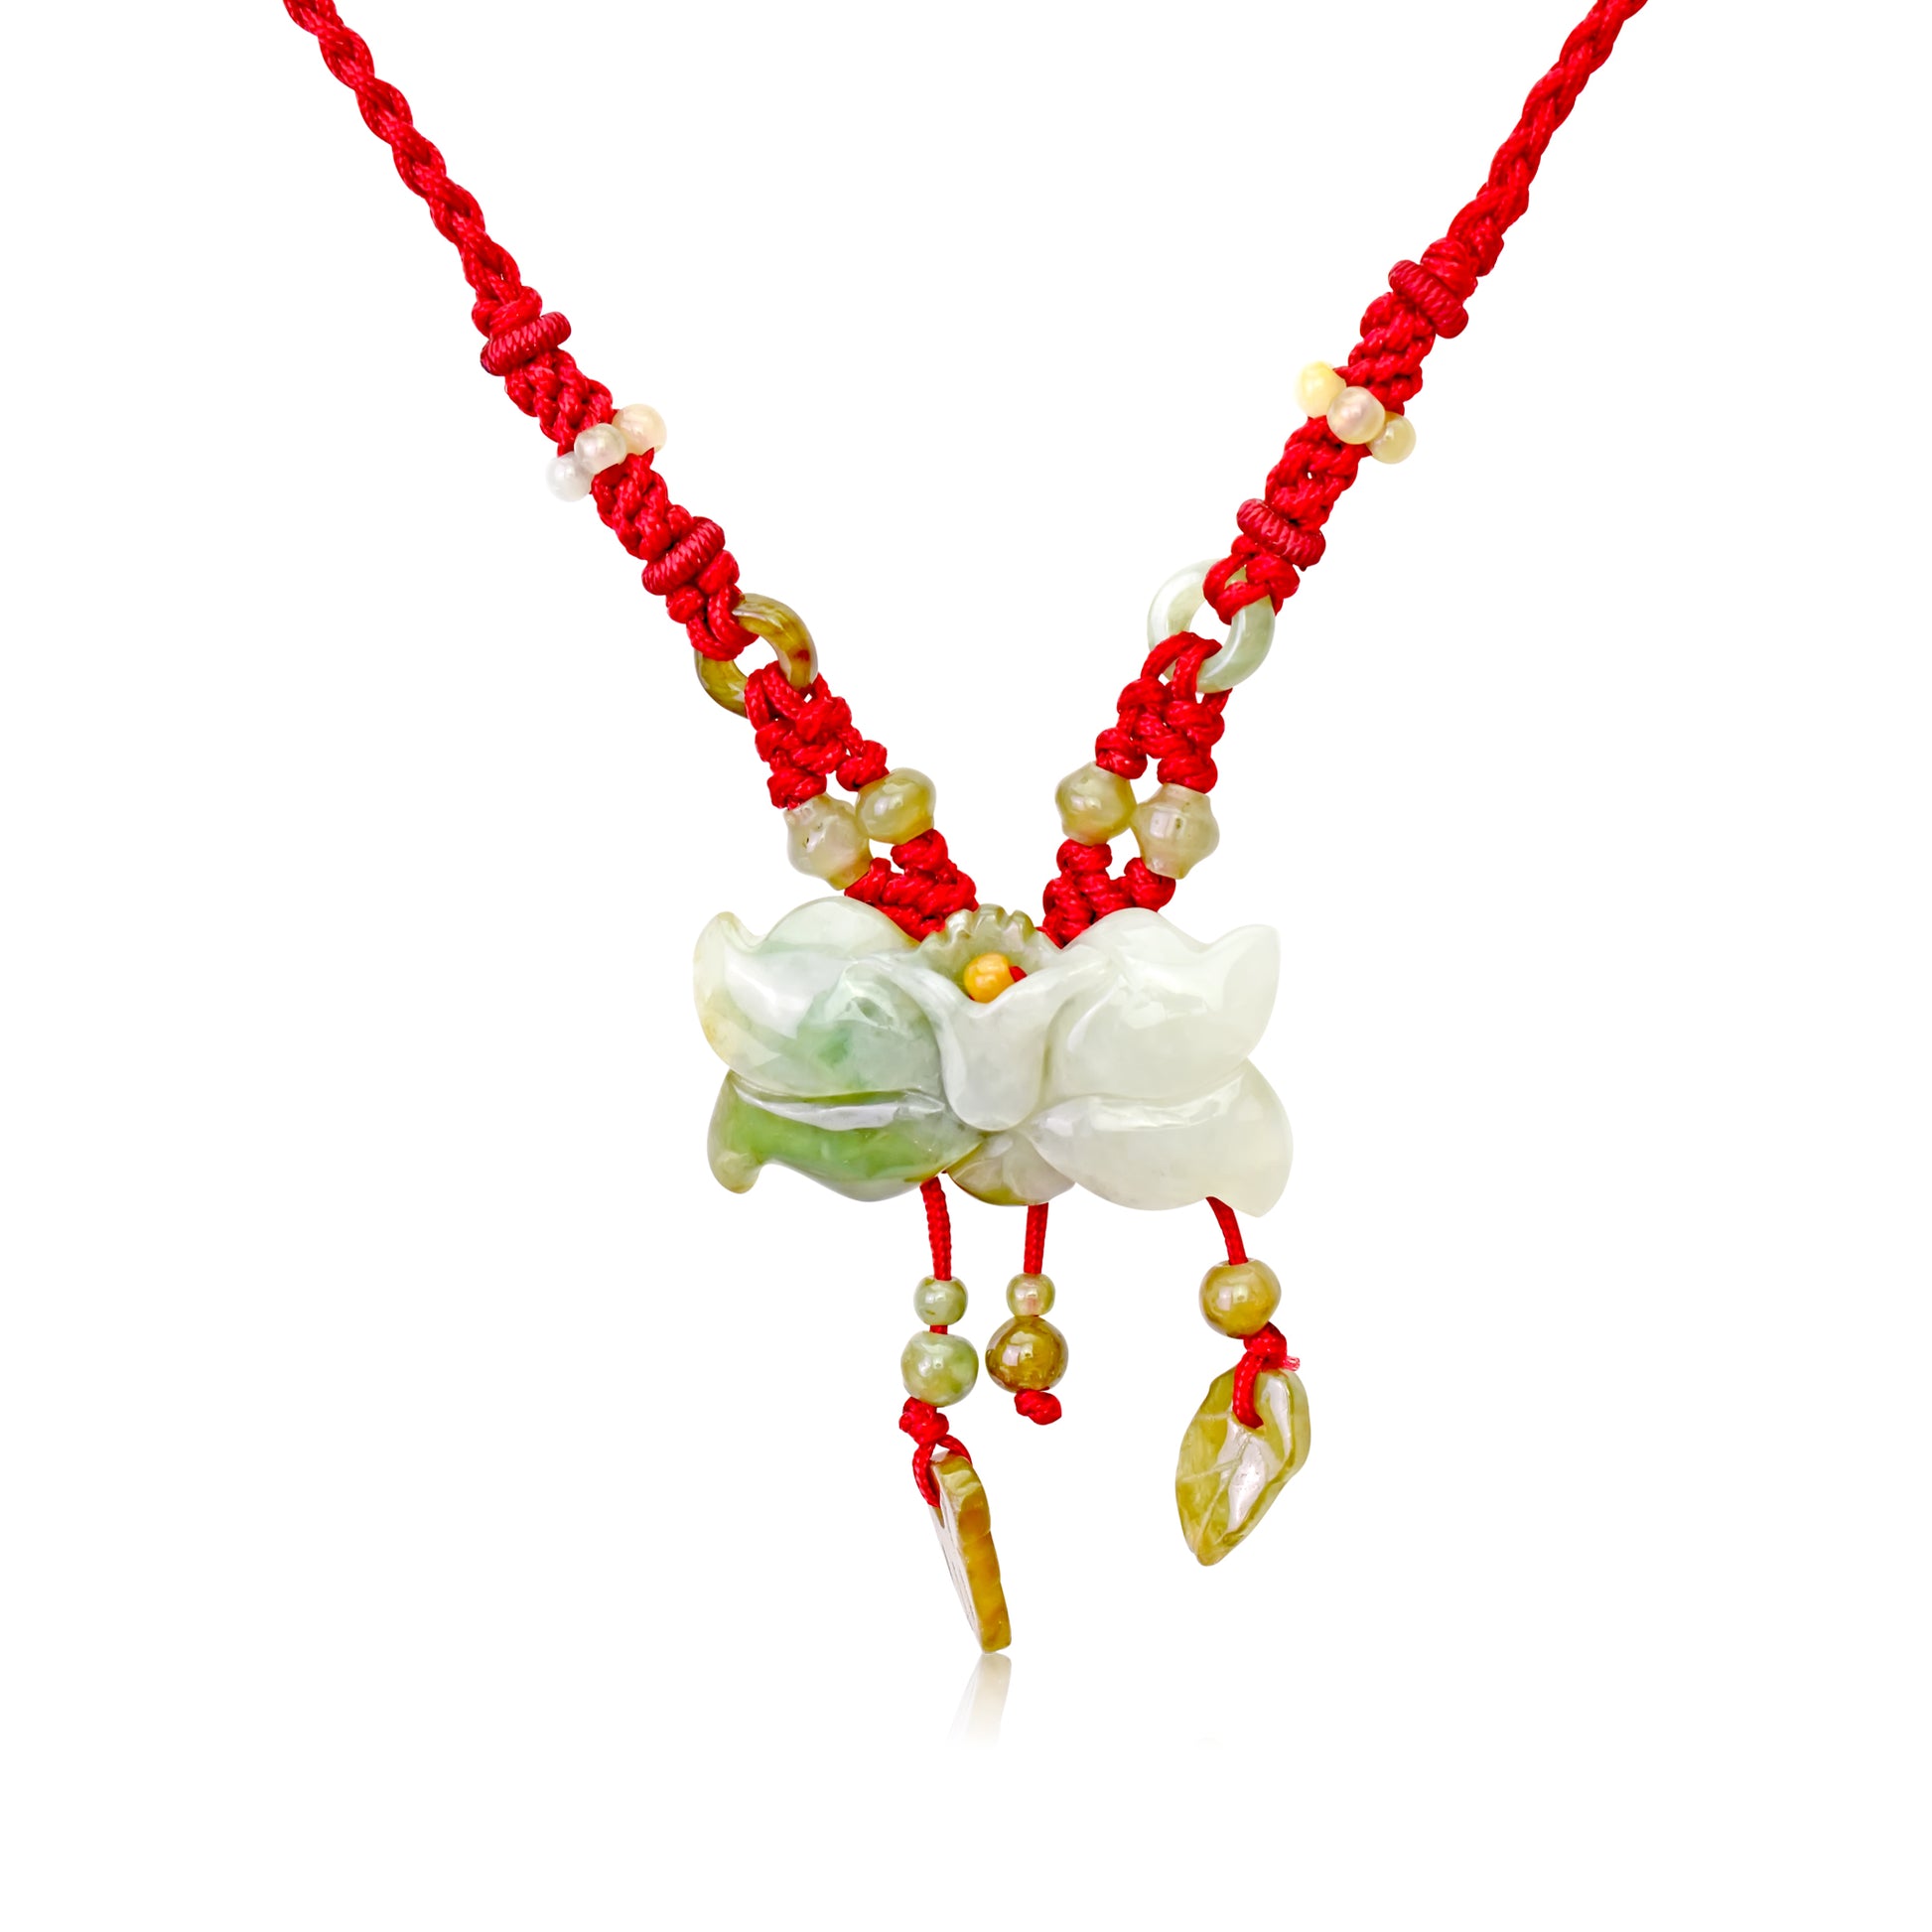 Beautifully Accessorized Wild Indigo Flower Handmade Jade Necklace with Red Cord